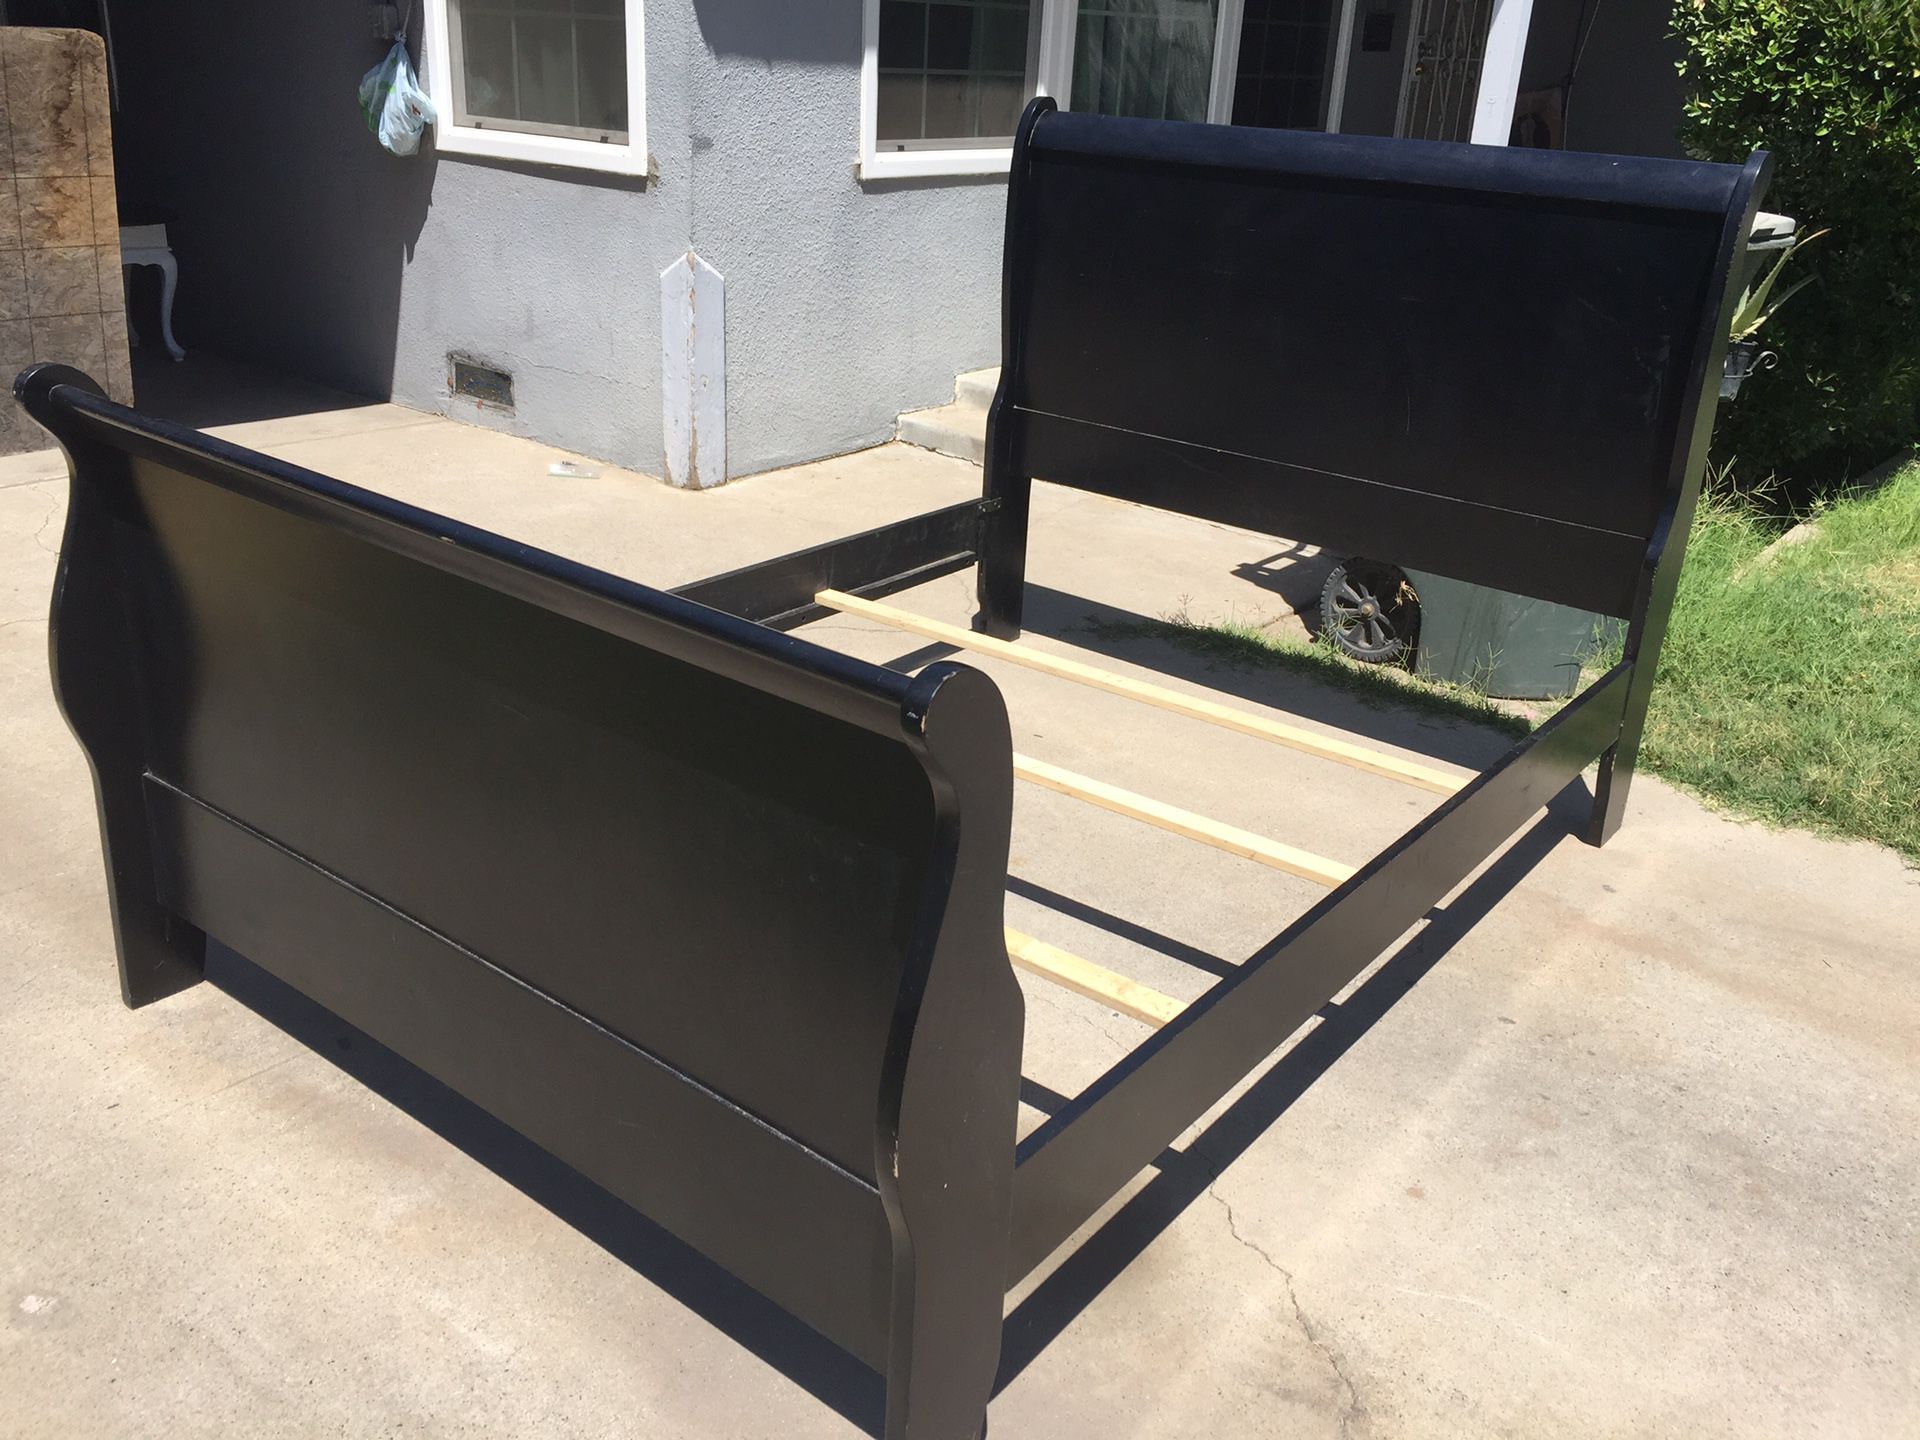 Black full bed frame in good condition.